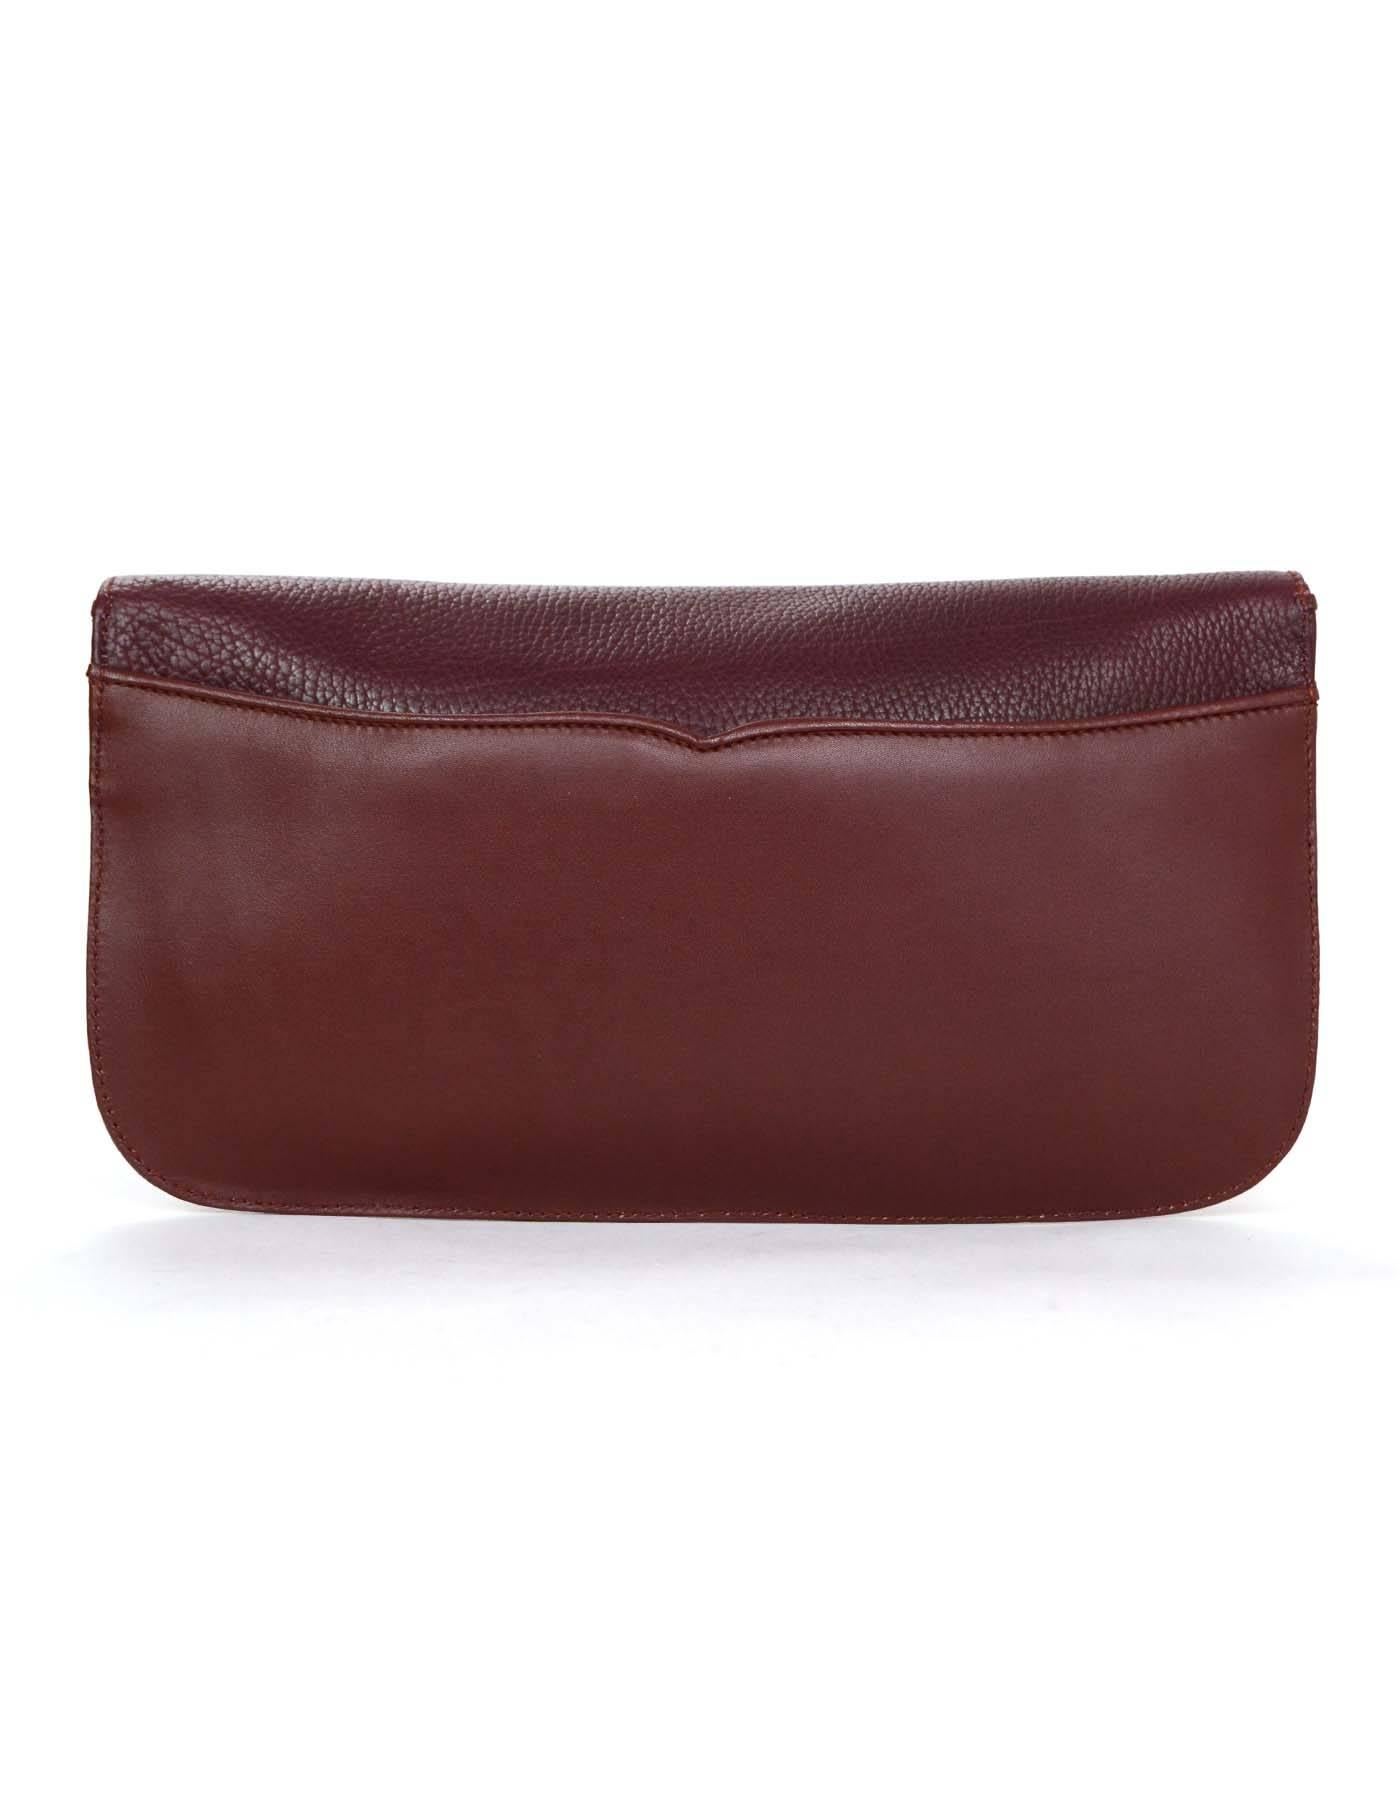 100% Authentic Cartier Burgundy Leather Clutch features textured and smooth leather with gold tone Cartier logo. Back slit pocket allows for extra space in addition to roomy interior.

    Color: Burgundy deep red with slight purple undertones
  